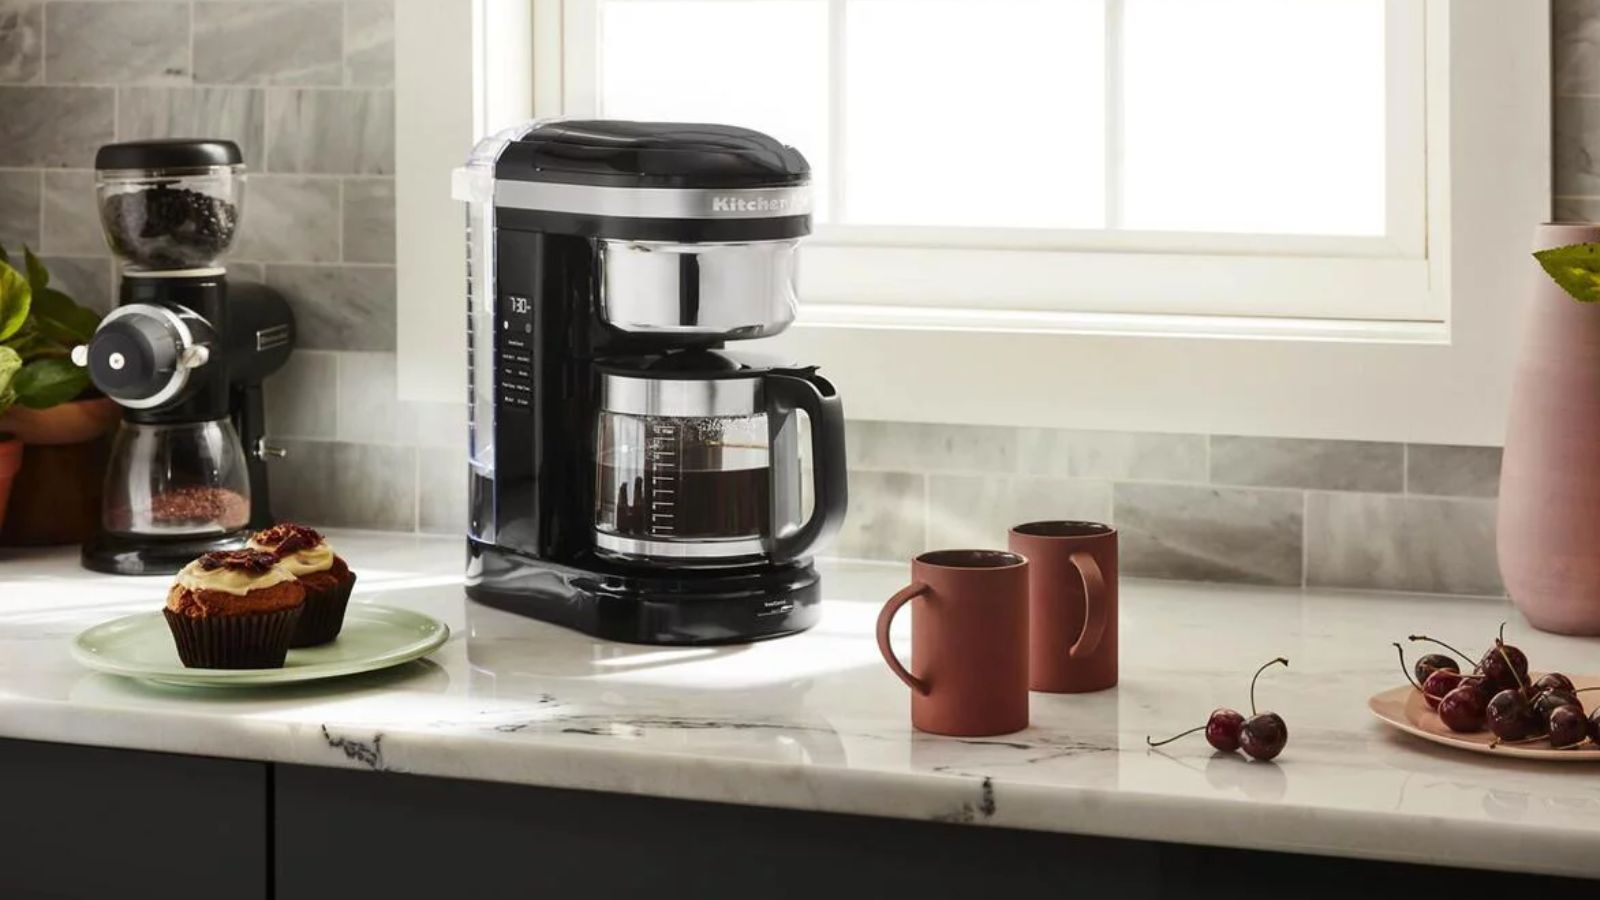 The best coffee machines of 2024, tried and tested